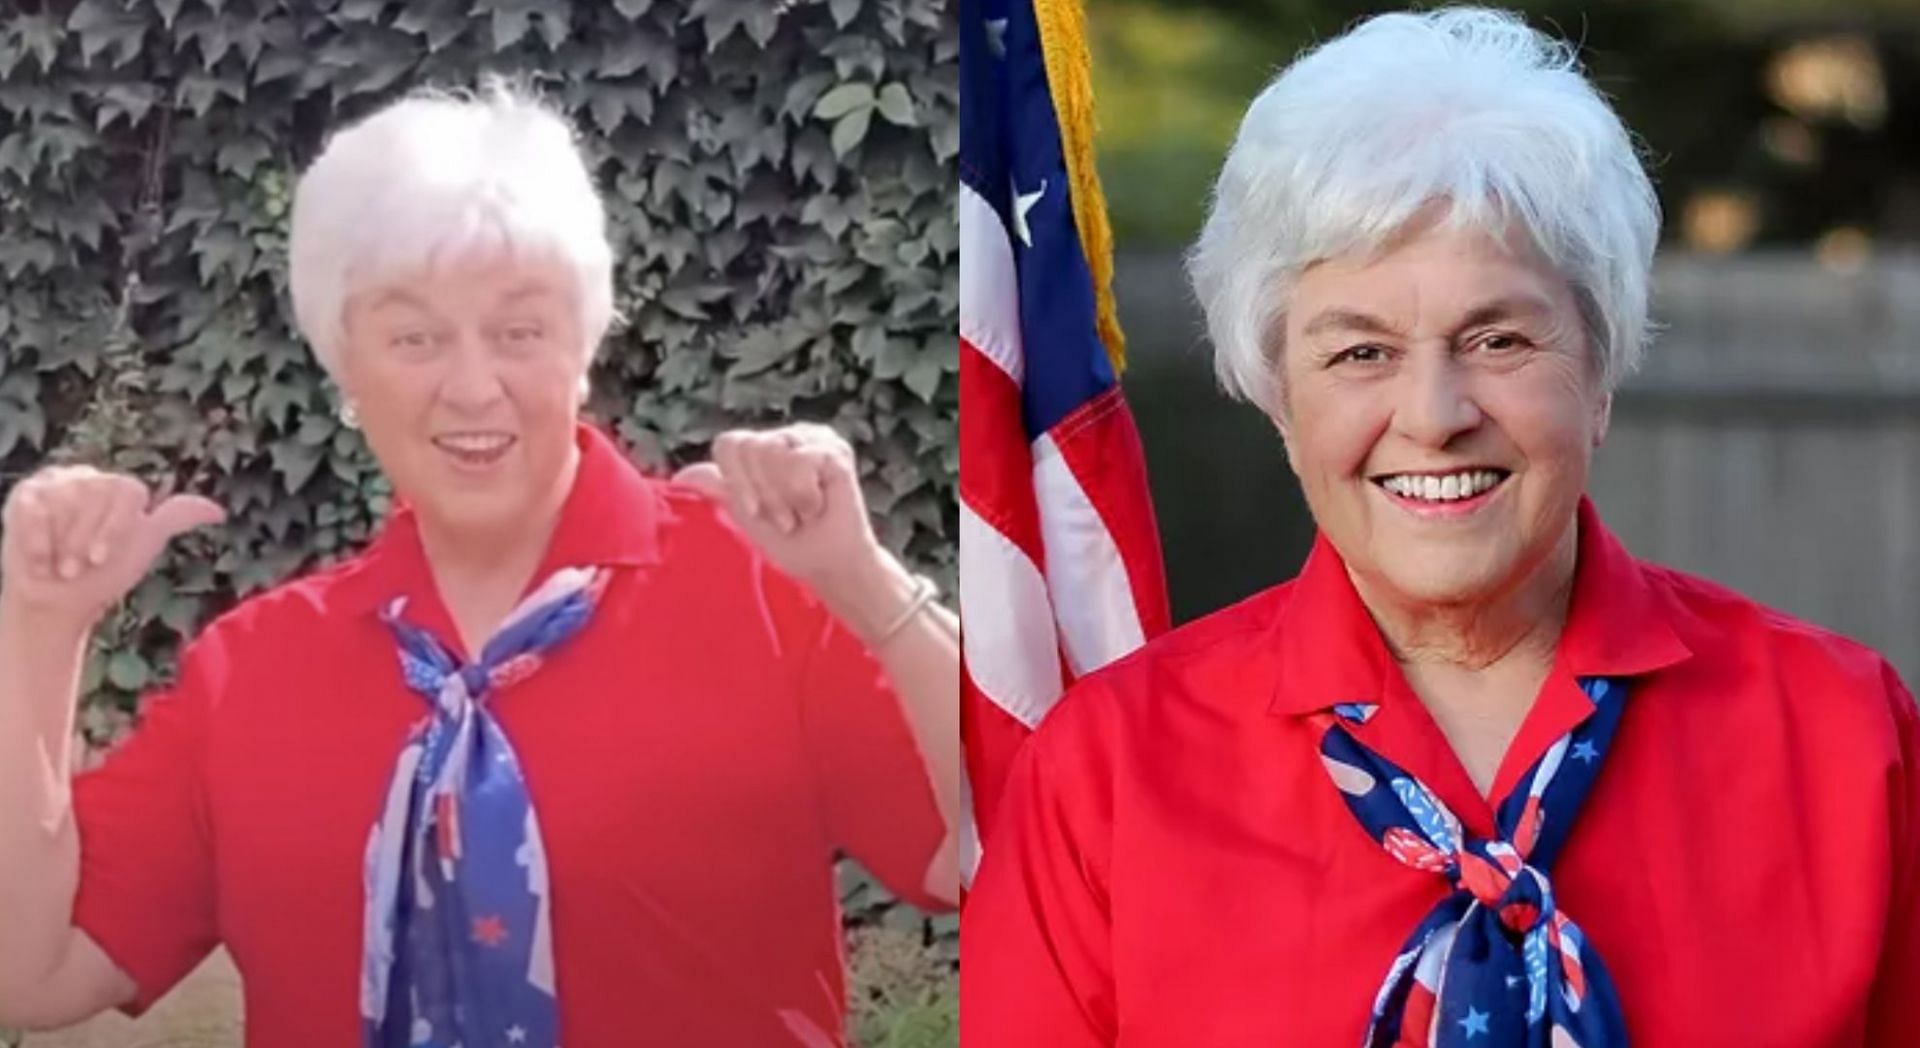 Linda Paulson was mocked online for her Utah campaign ad video (Image via The Young Turks/YouTube and Linda Paulson)